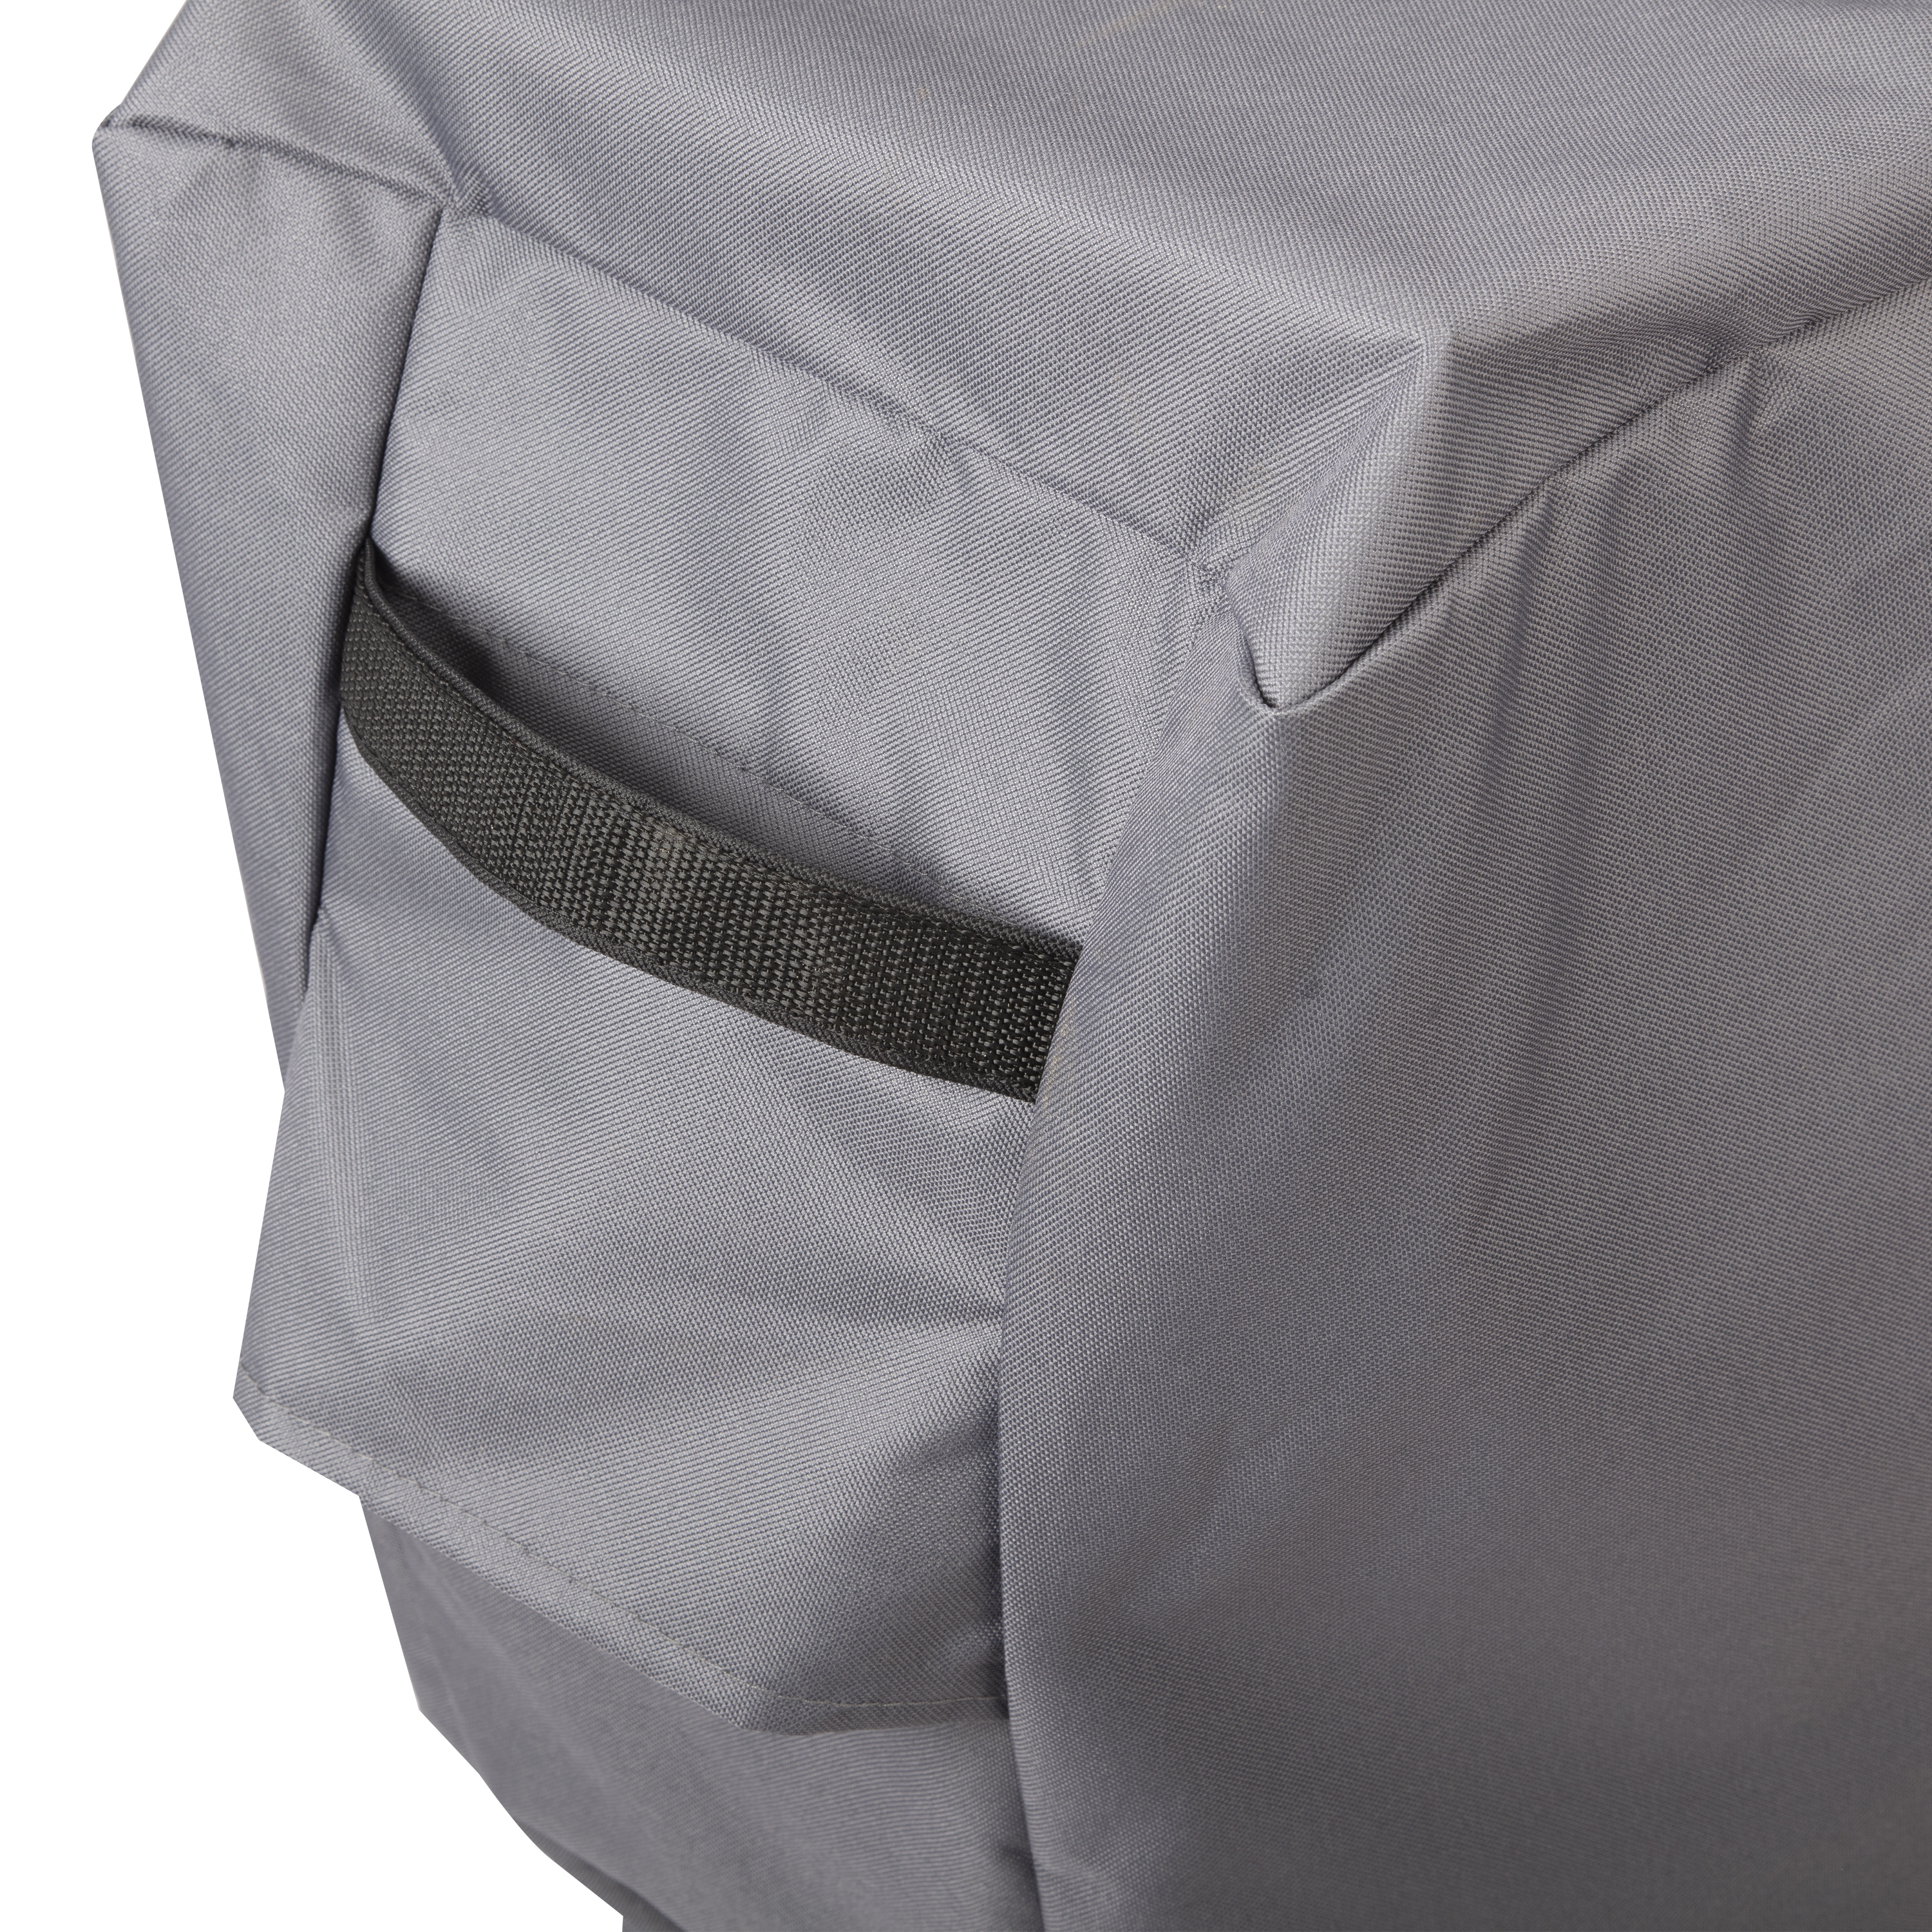 700 sq.in. Deluxe Pellet Grill Cover